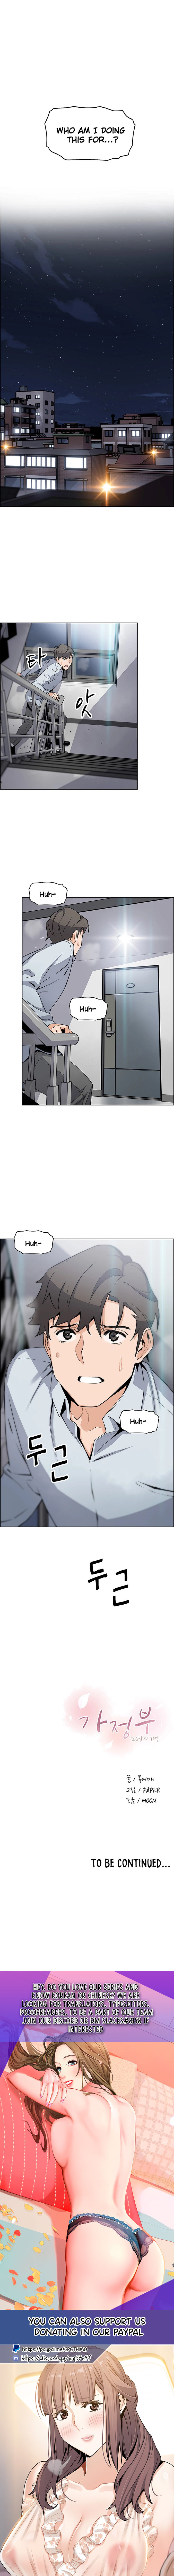 Housekeeper Manhwa - Chapter 46 Page 8